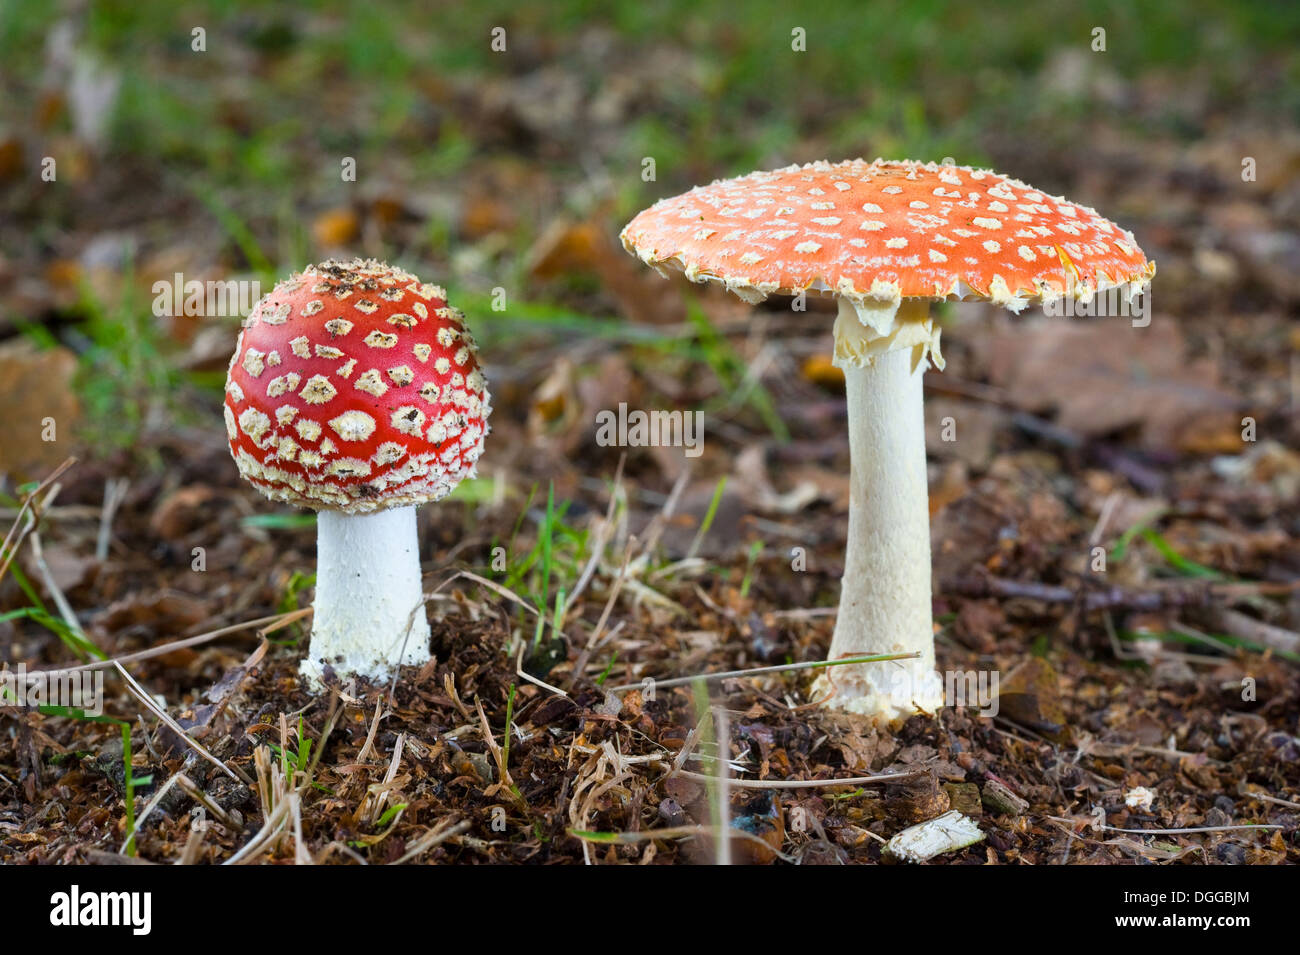 Two amanita muscaria mushrooms growing in a forest in the autumn Stock Photo